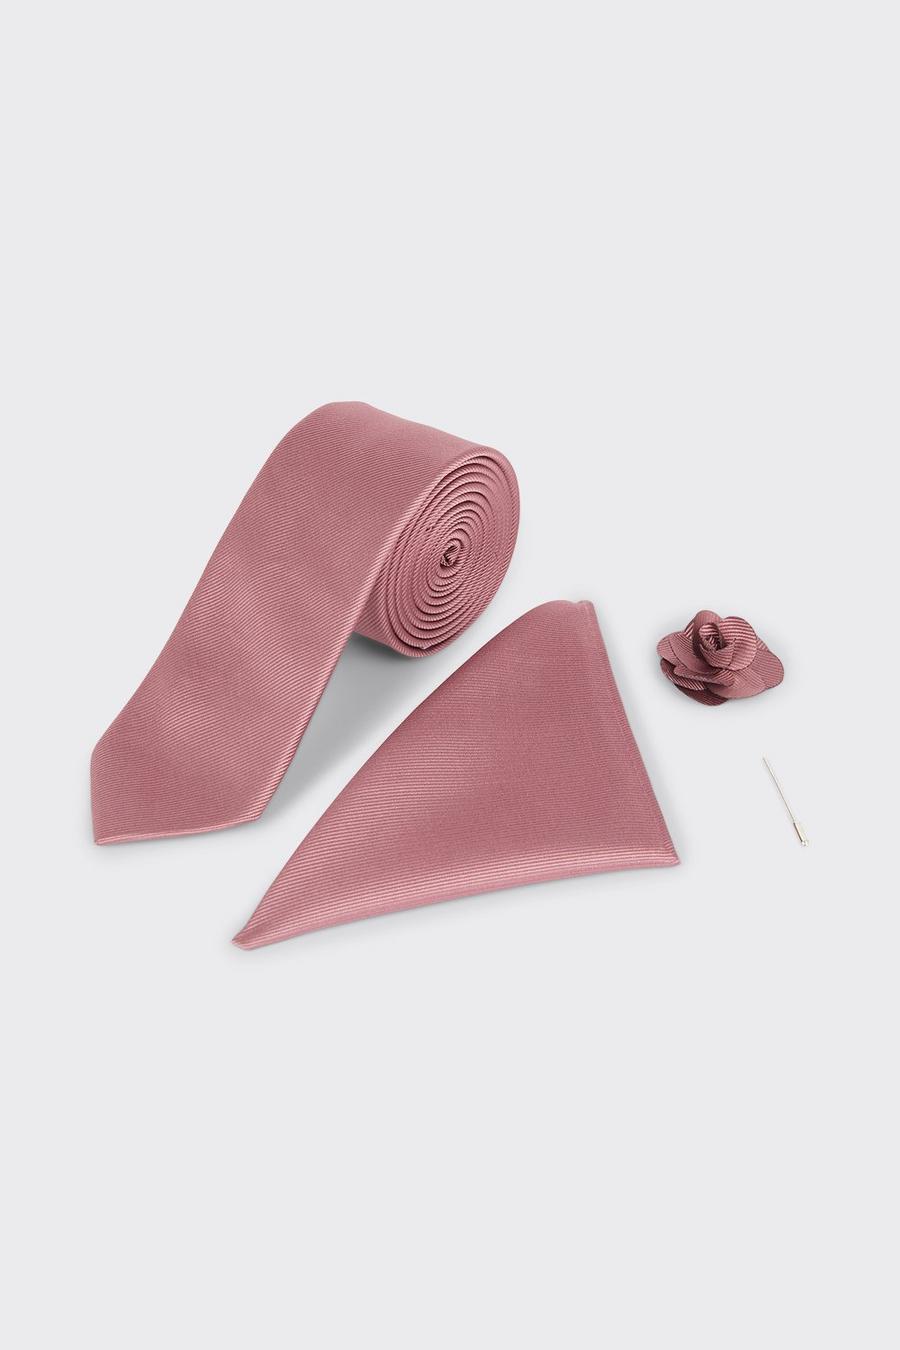 Dusty Rose Pink Wedding Tie Set With Matching Lapel Pin